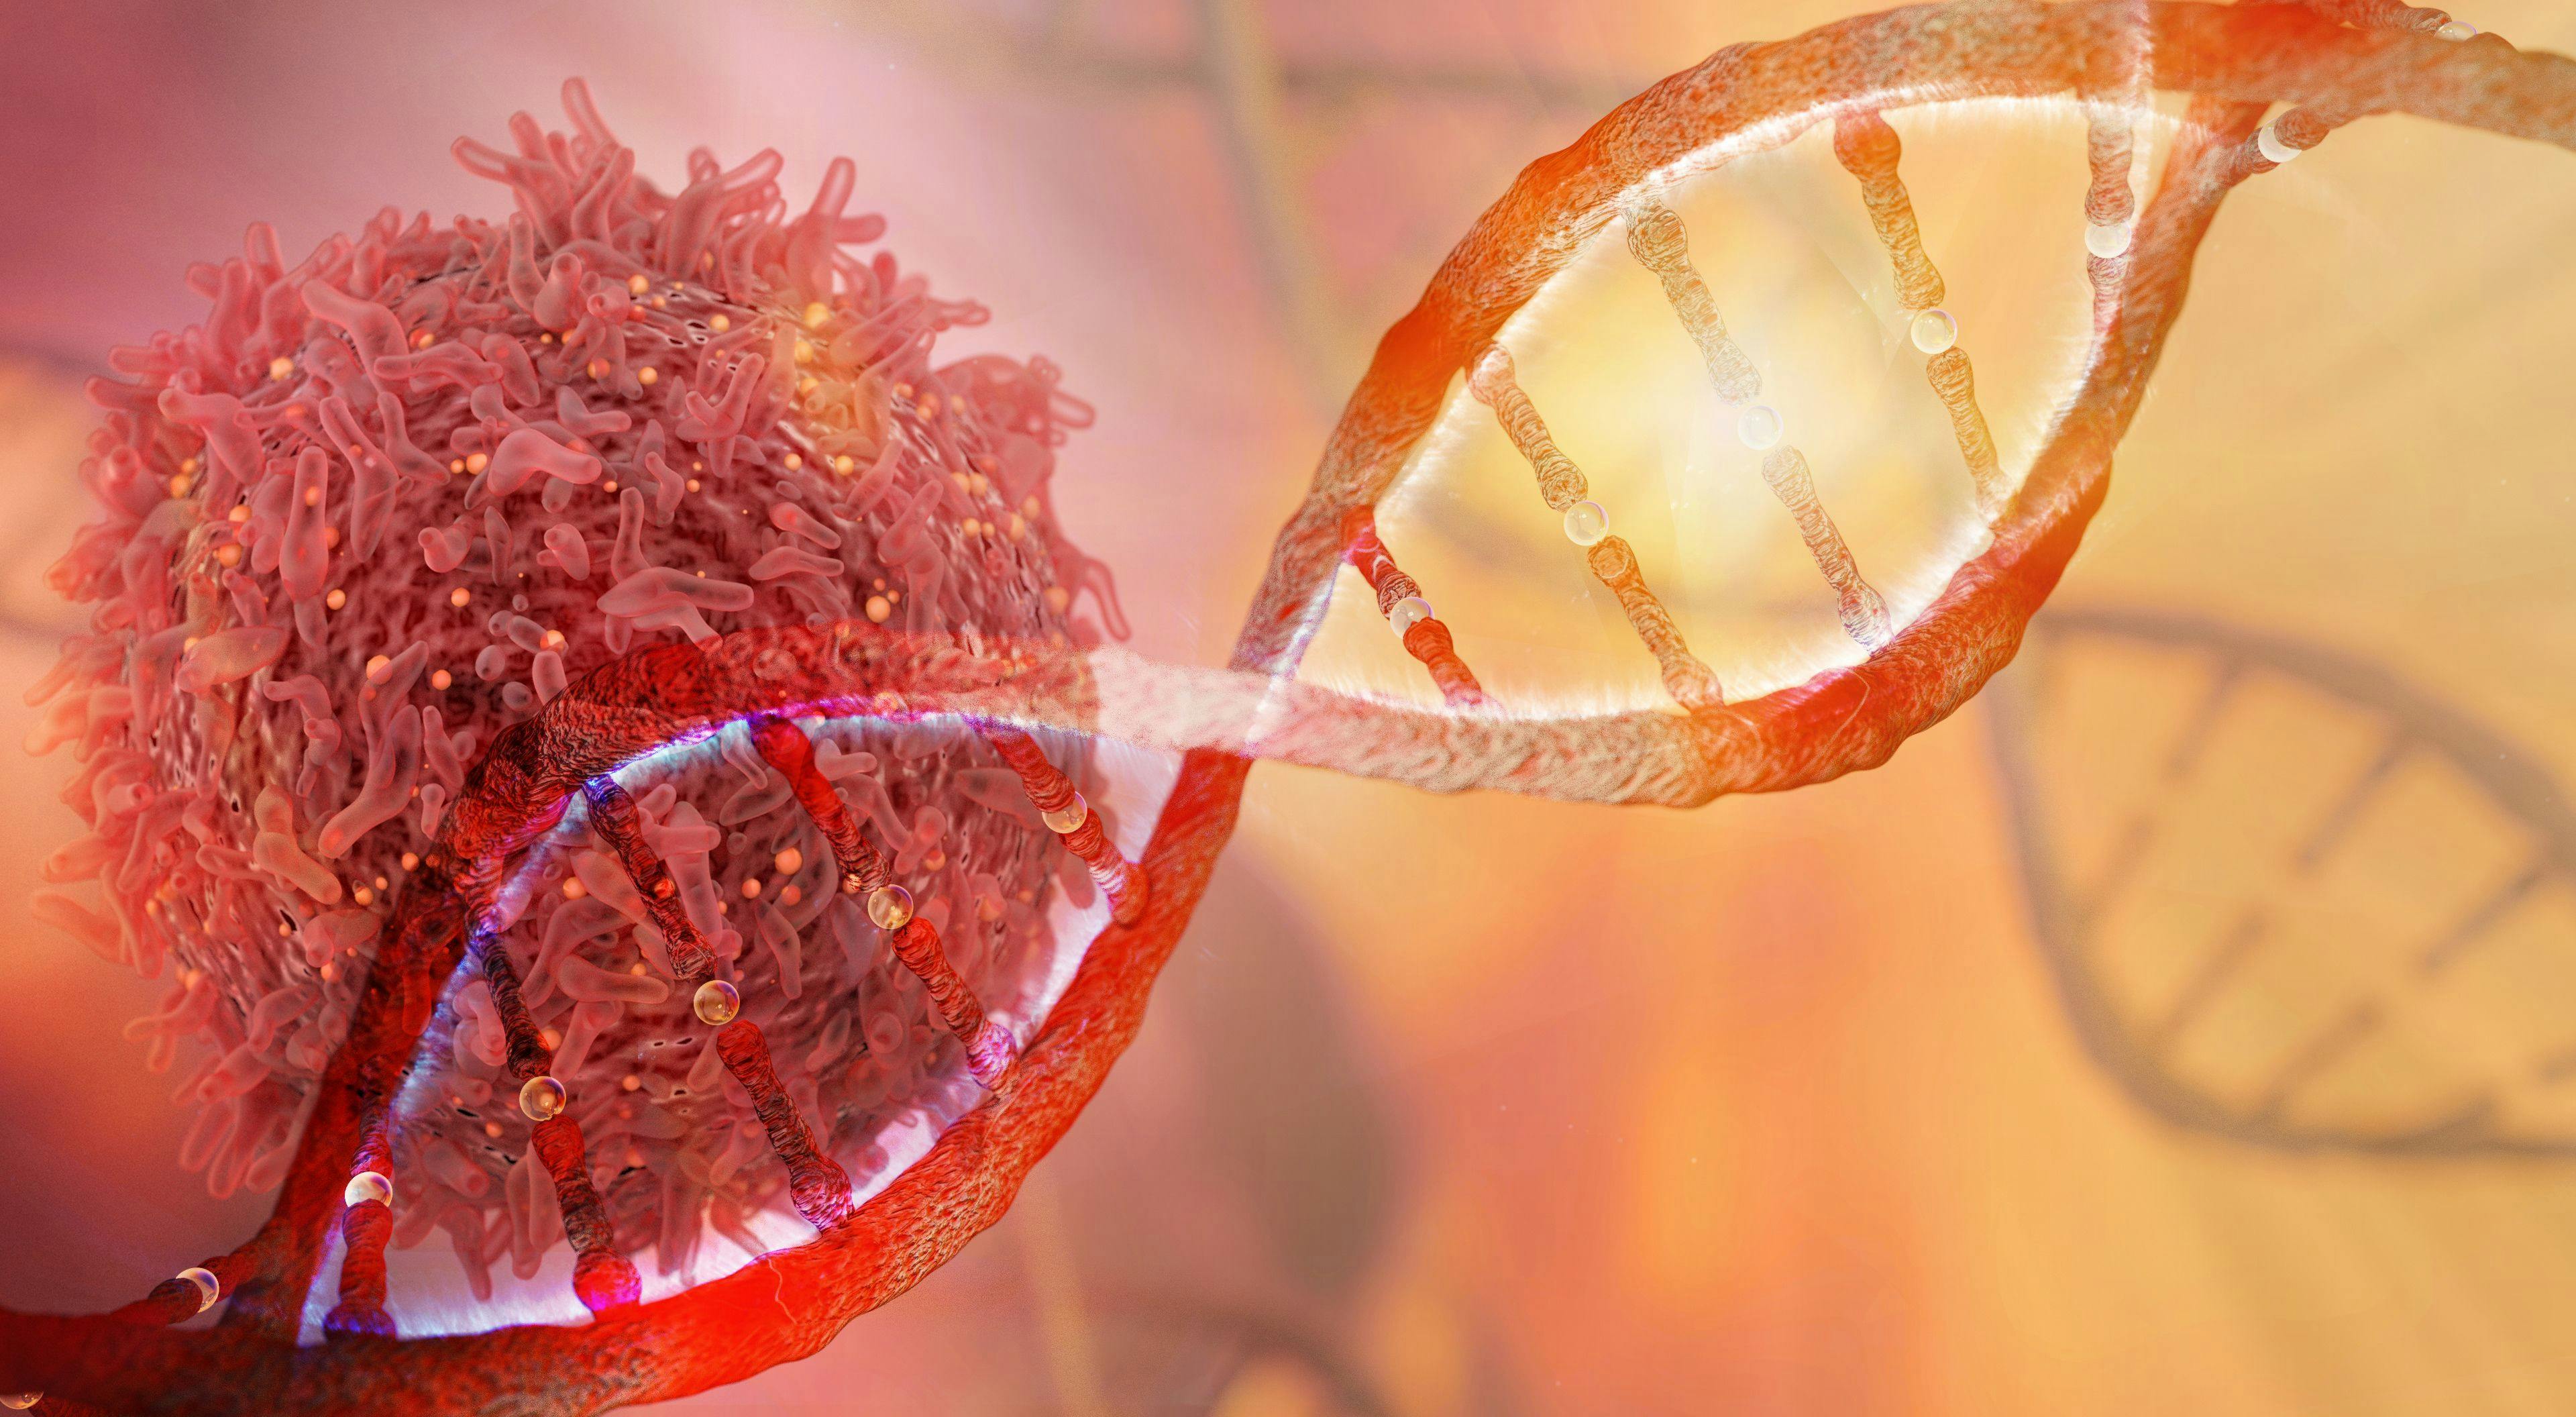 Tumor DNA May Predict Outcomes to Presurgical Treatment in Patients with Bladder Cancer